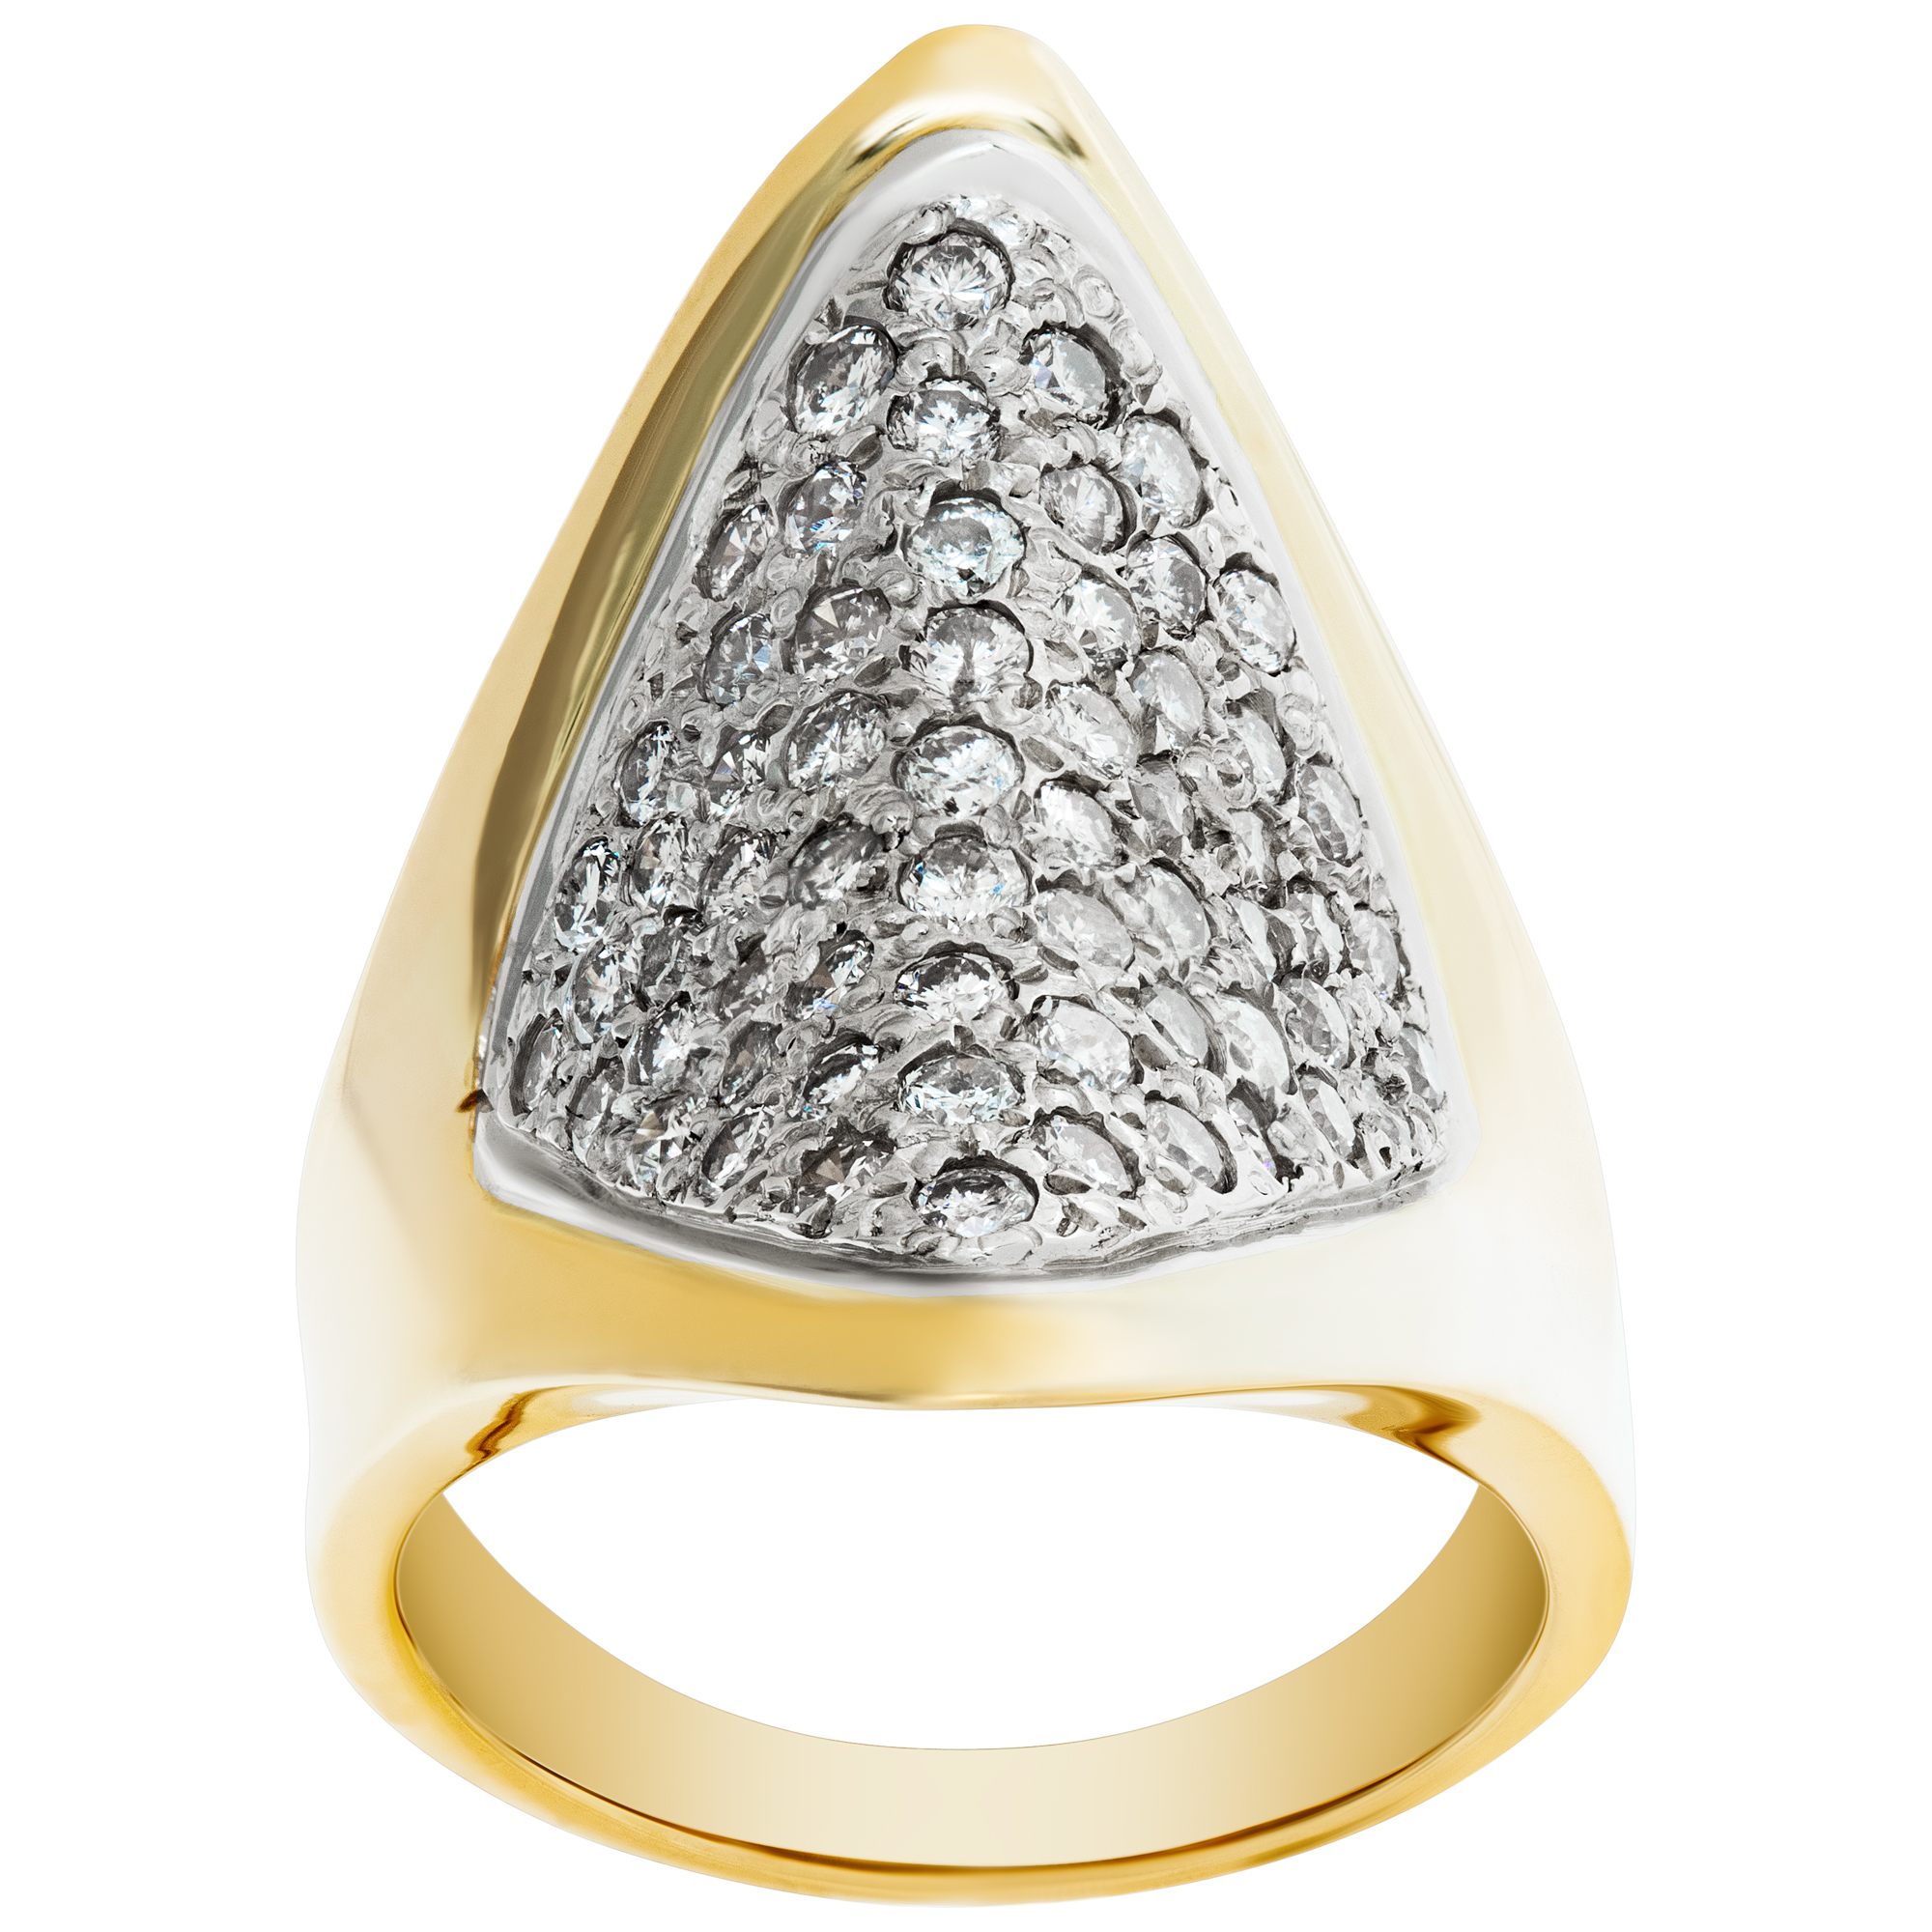 Modern diamonds ring in 18k. Round brilliant cut diamonds total approx.weight: 1.00 carat. image 1